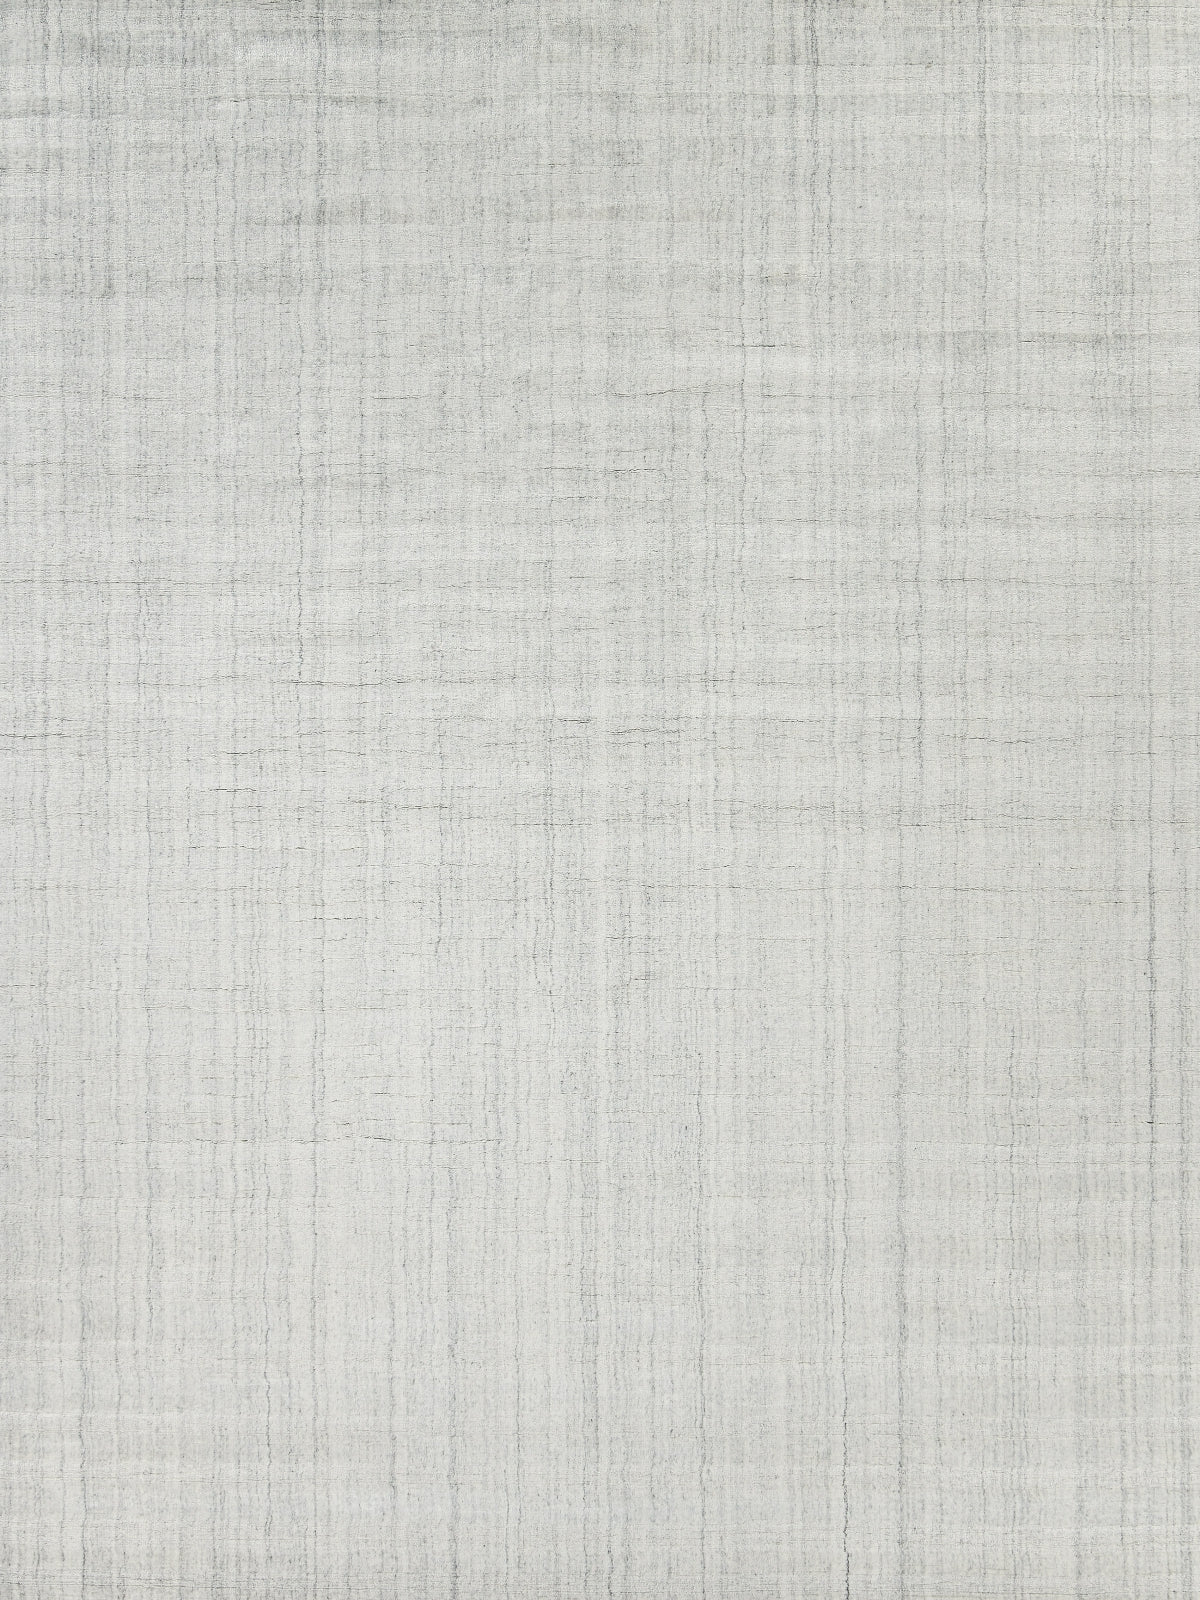 Exquisite Rugs Robin Stripe 3783 Ivory/Gray Area Rug